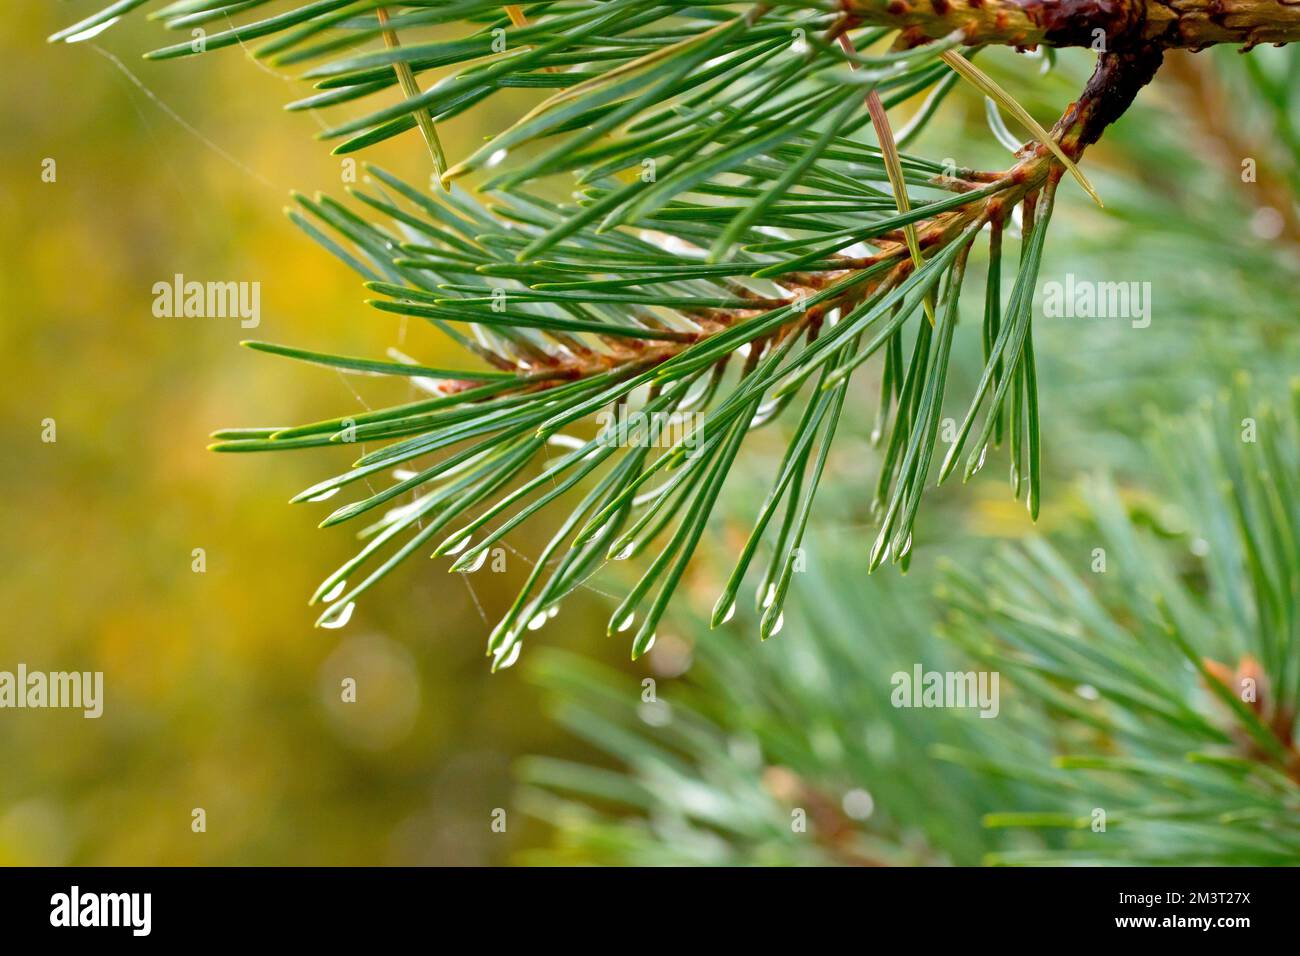 Scot's Pine (pinus sylvestris), close up showing the green needles of the tree on a misty day with water droplets forming at the ends. Stock Photo